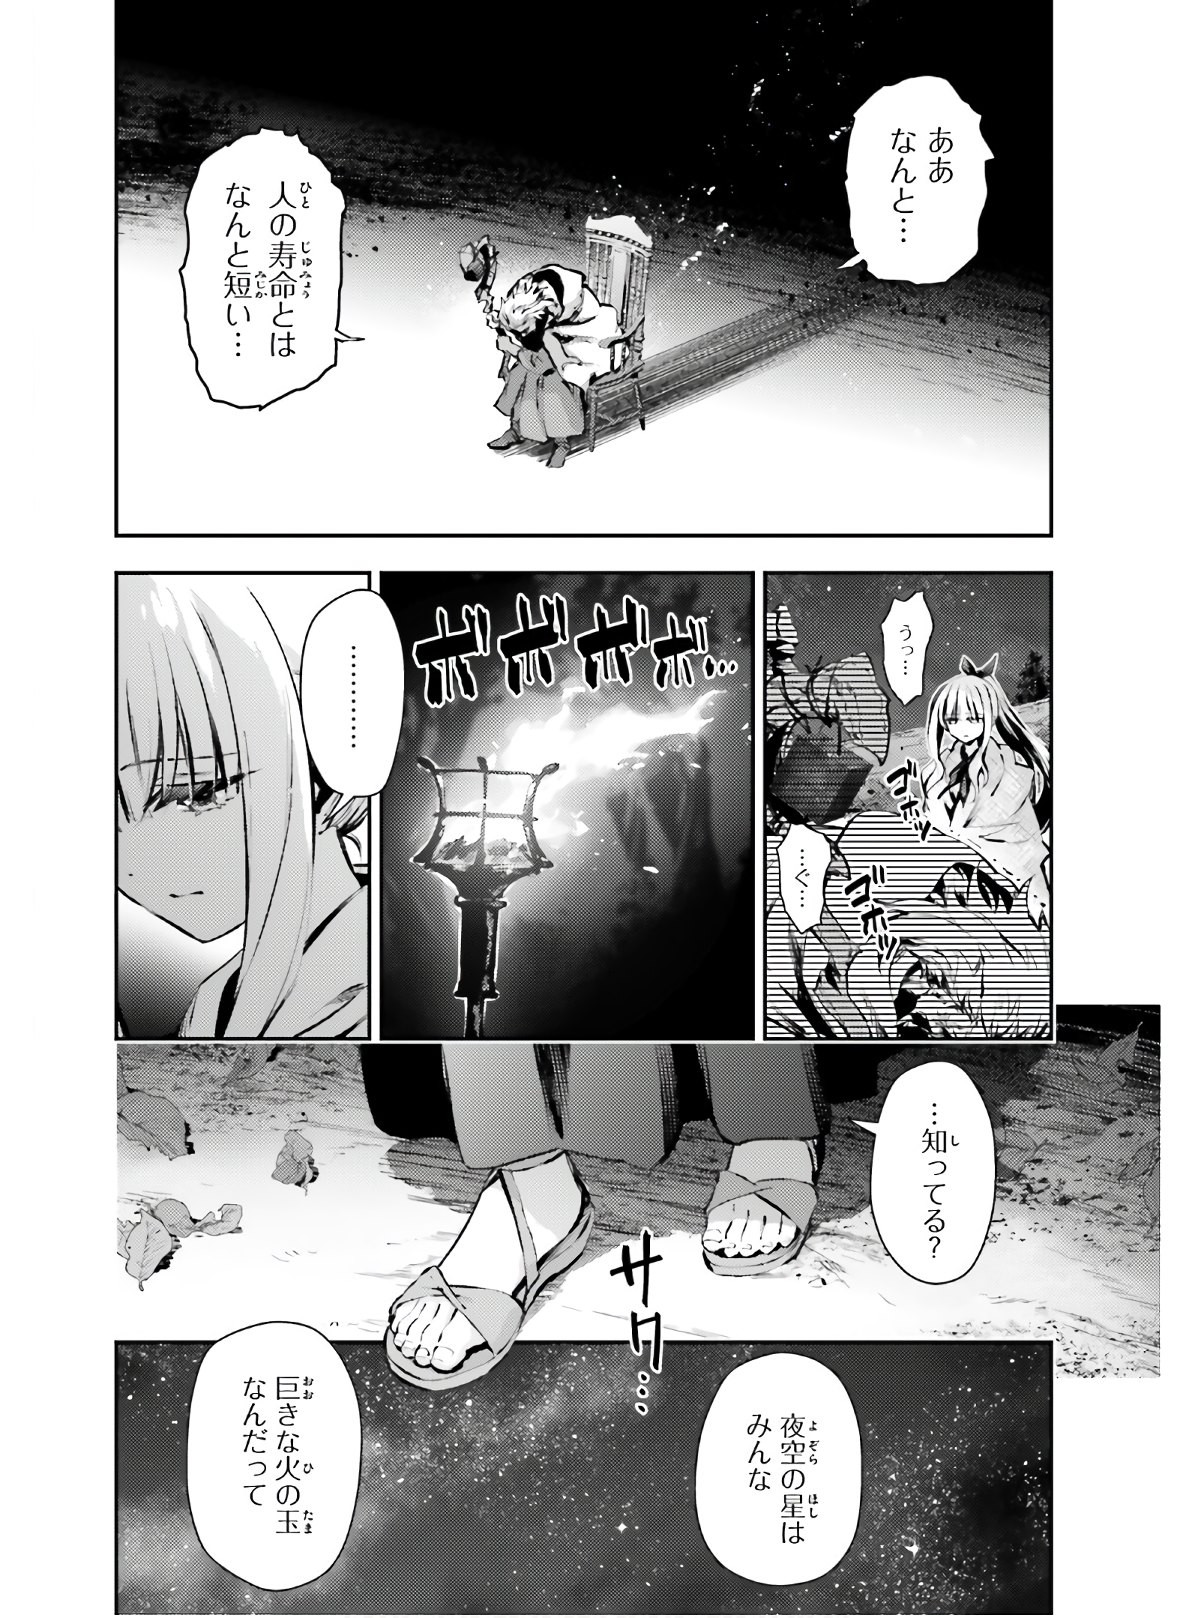 Fate/Kaleid Liner Prisma Illya Drei! - Chapter 65-1 - Page 4